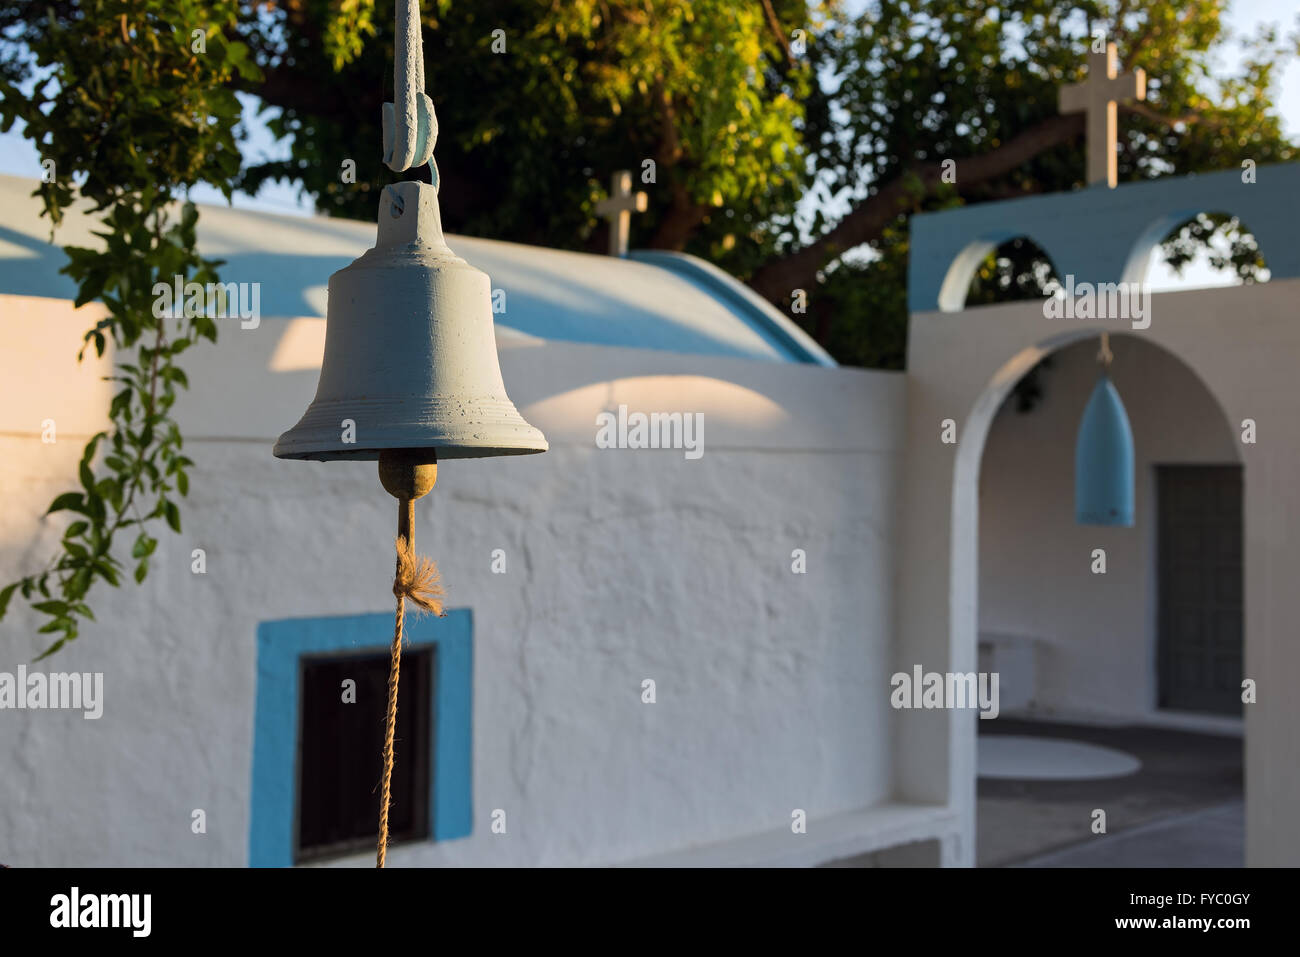 Small traditional church at sunset in Kos island, Greece Stock Photo